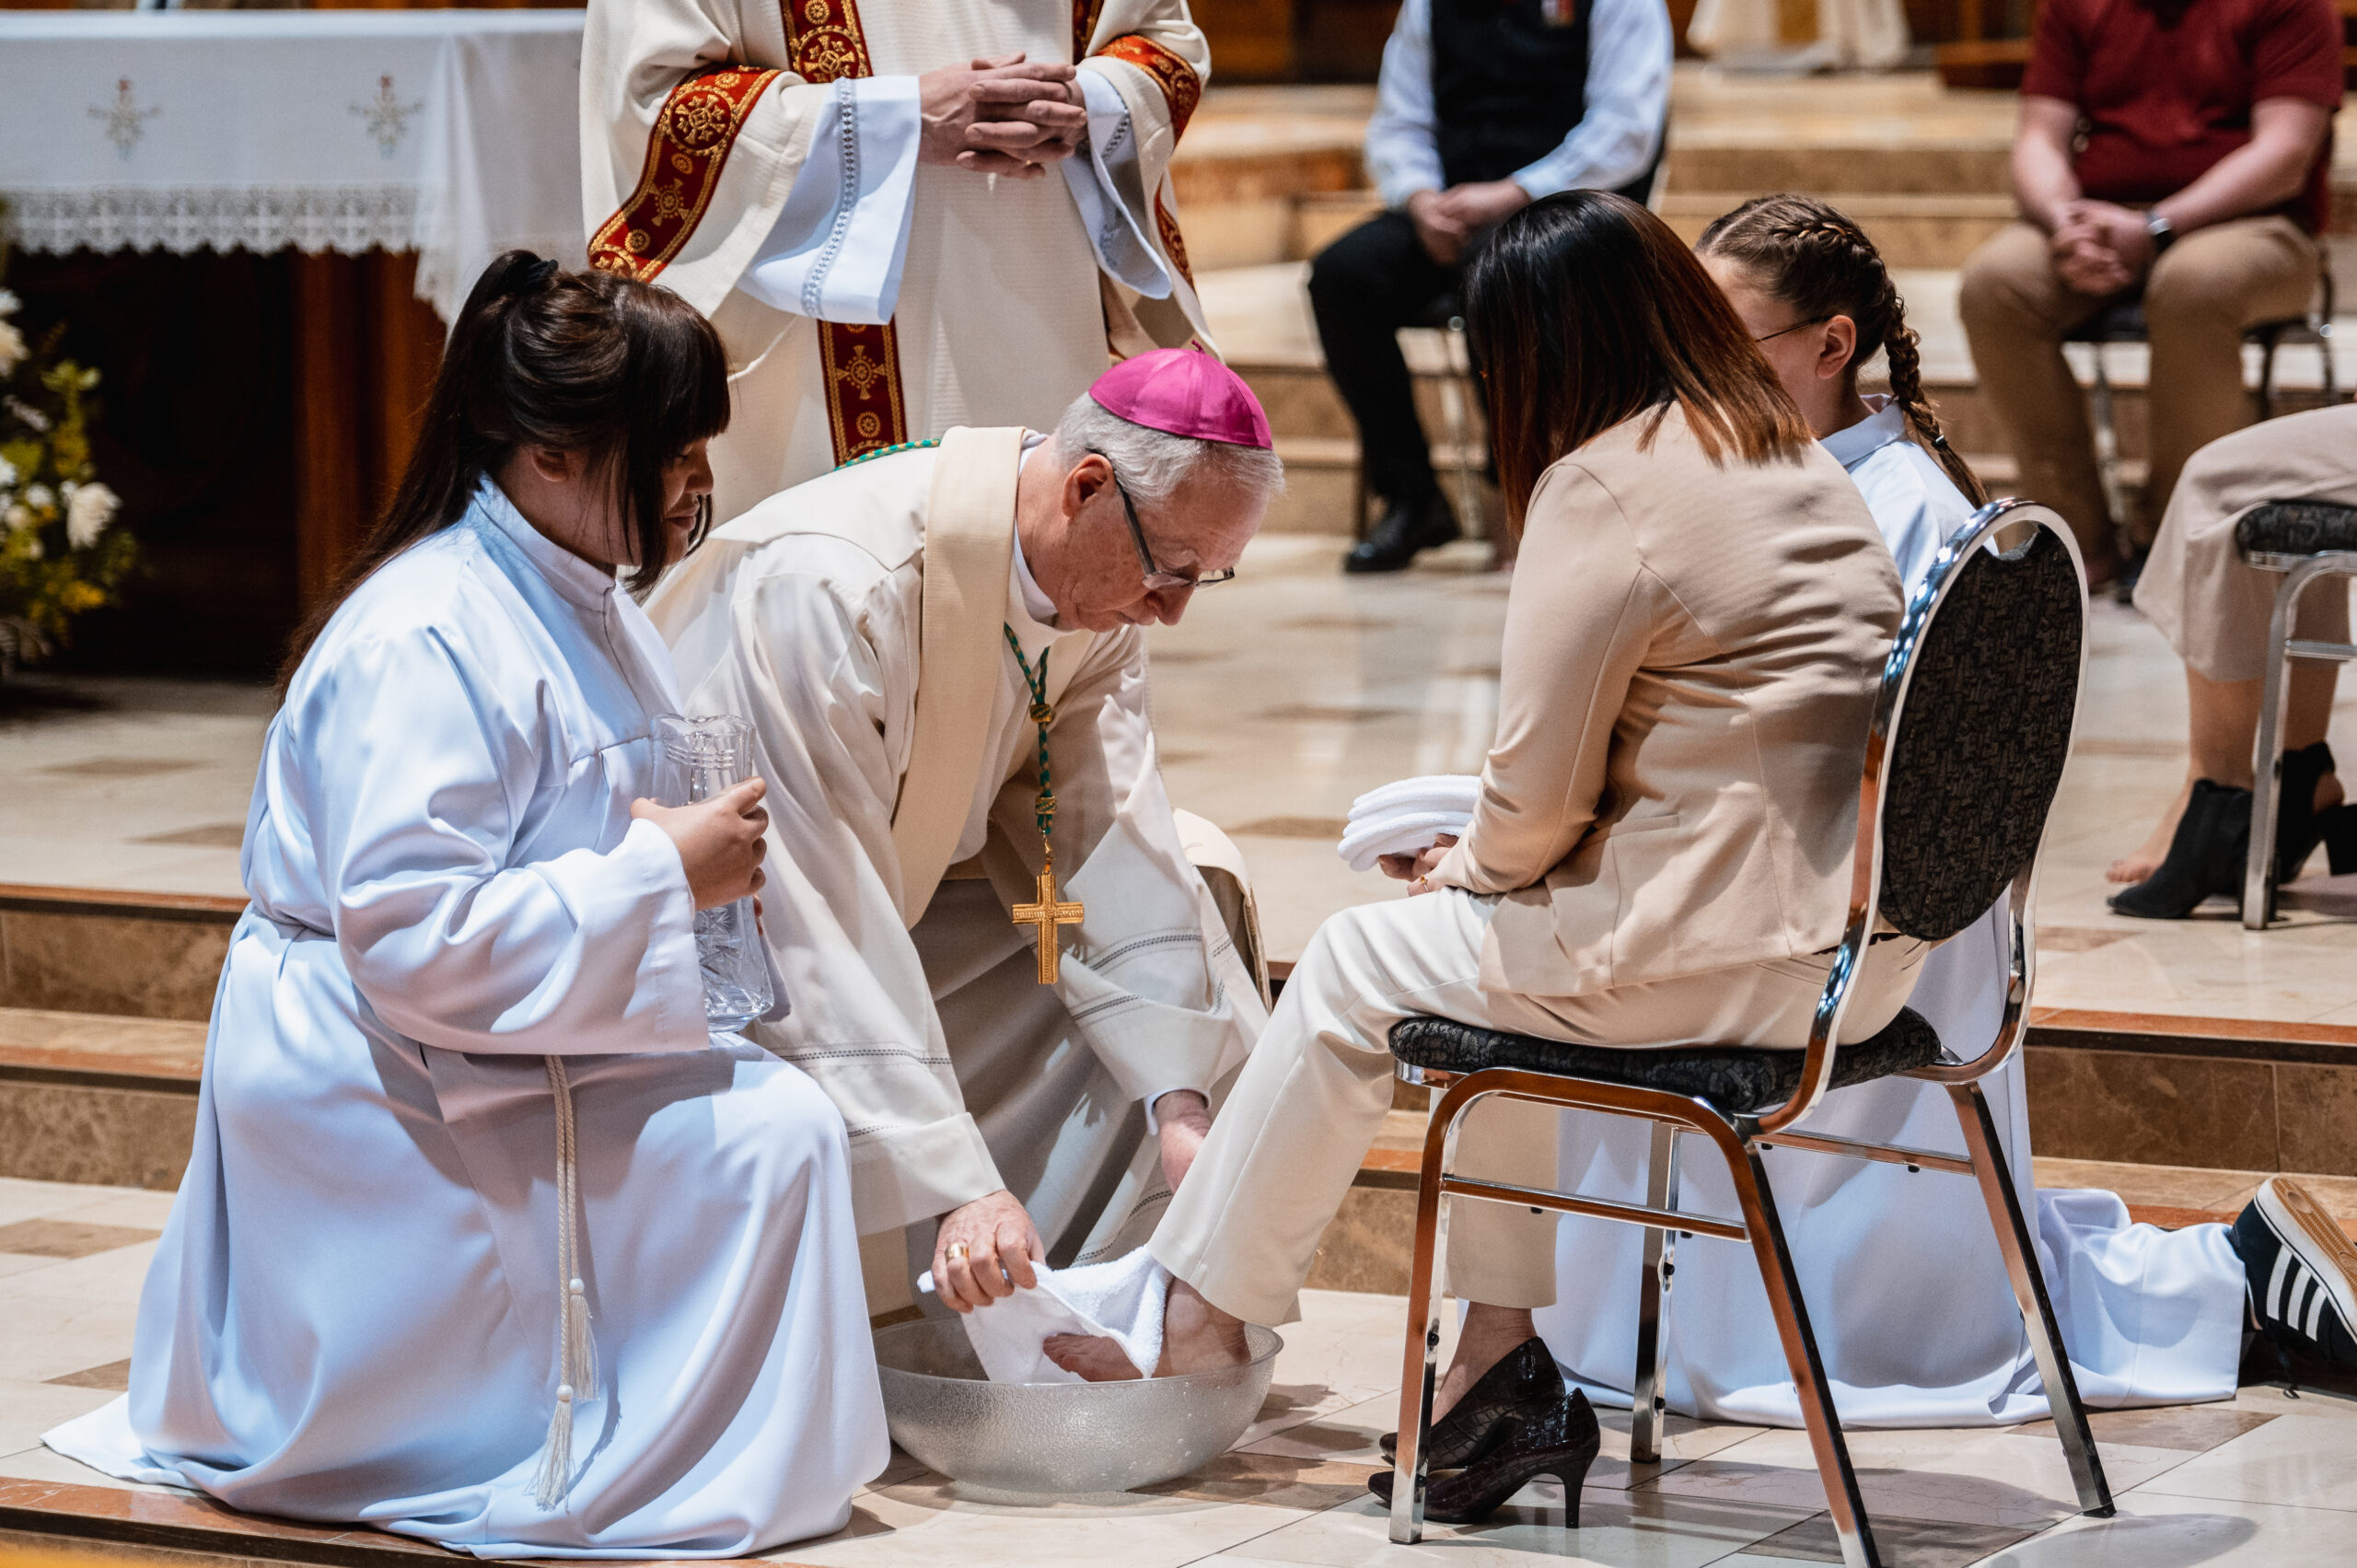 Archbishop Smith washes the feet of 12 representatives, just as Christ washed the feet of the 12 disciples.